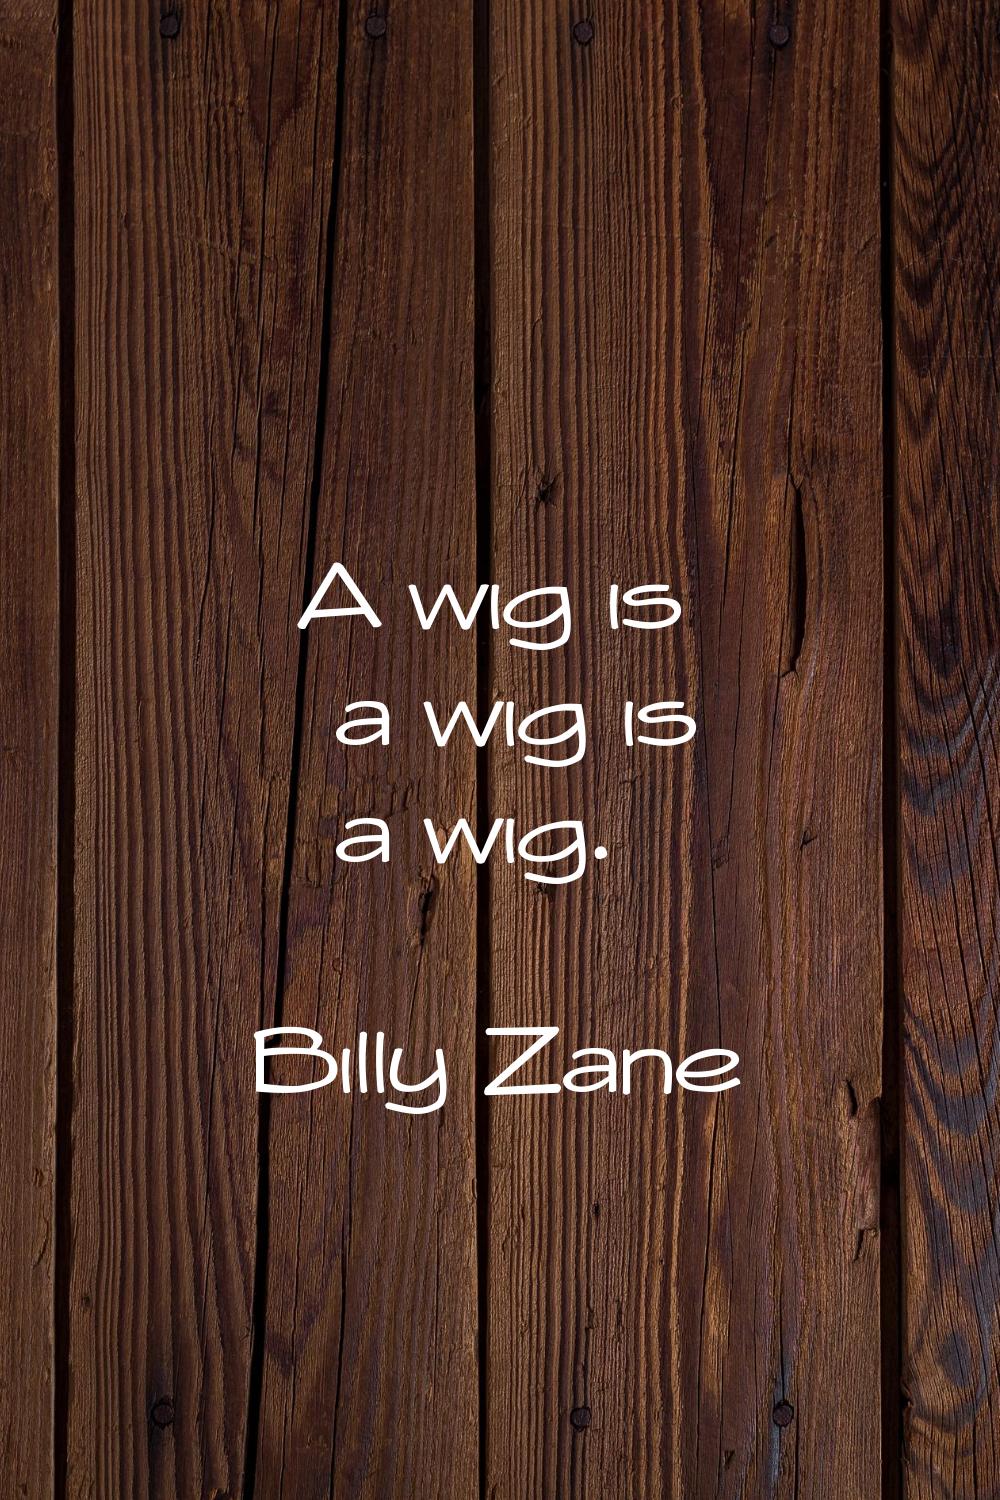 A wig is a wig is a wig.